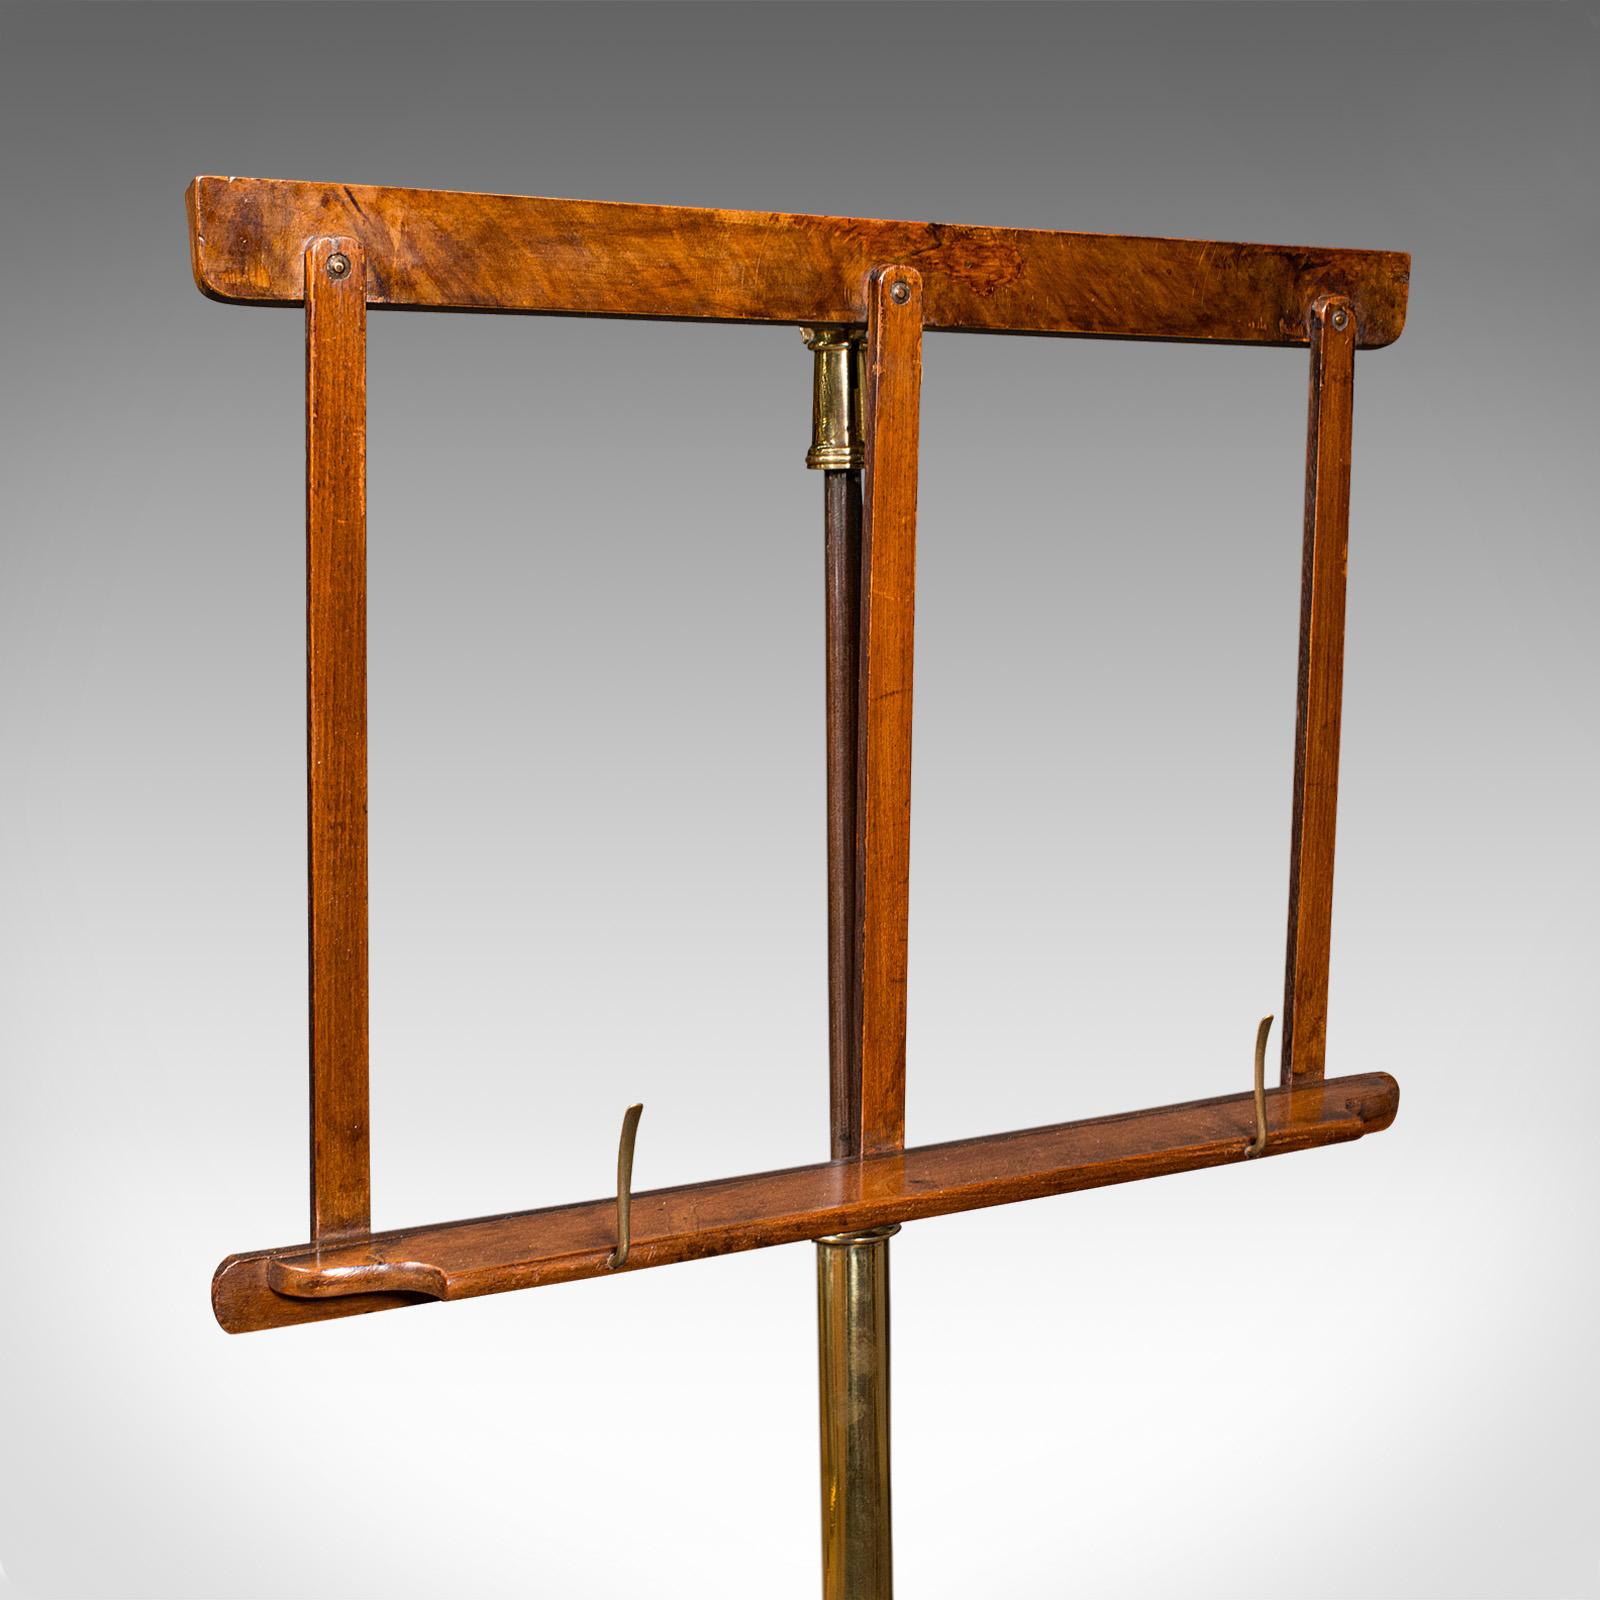 Antique Music Stand, English, Adjustable, Recital, Lectern Rest, Victorian, 1870 In Good Condition For Sale In Hele, Devon, GB